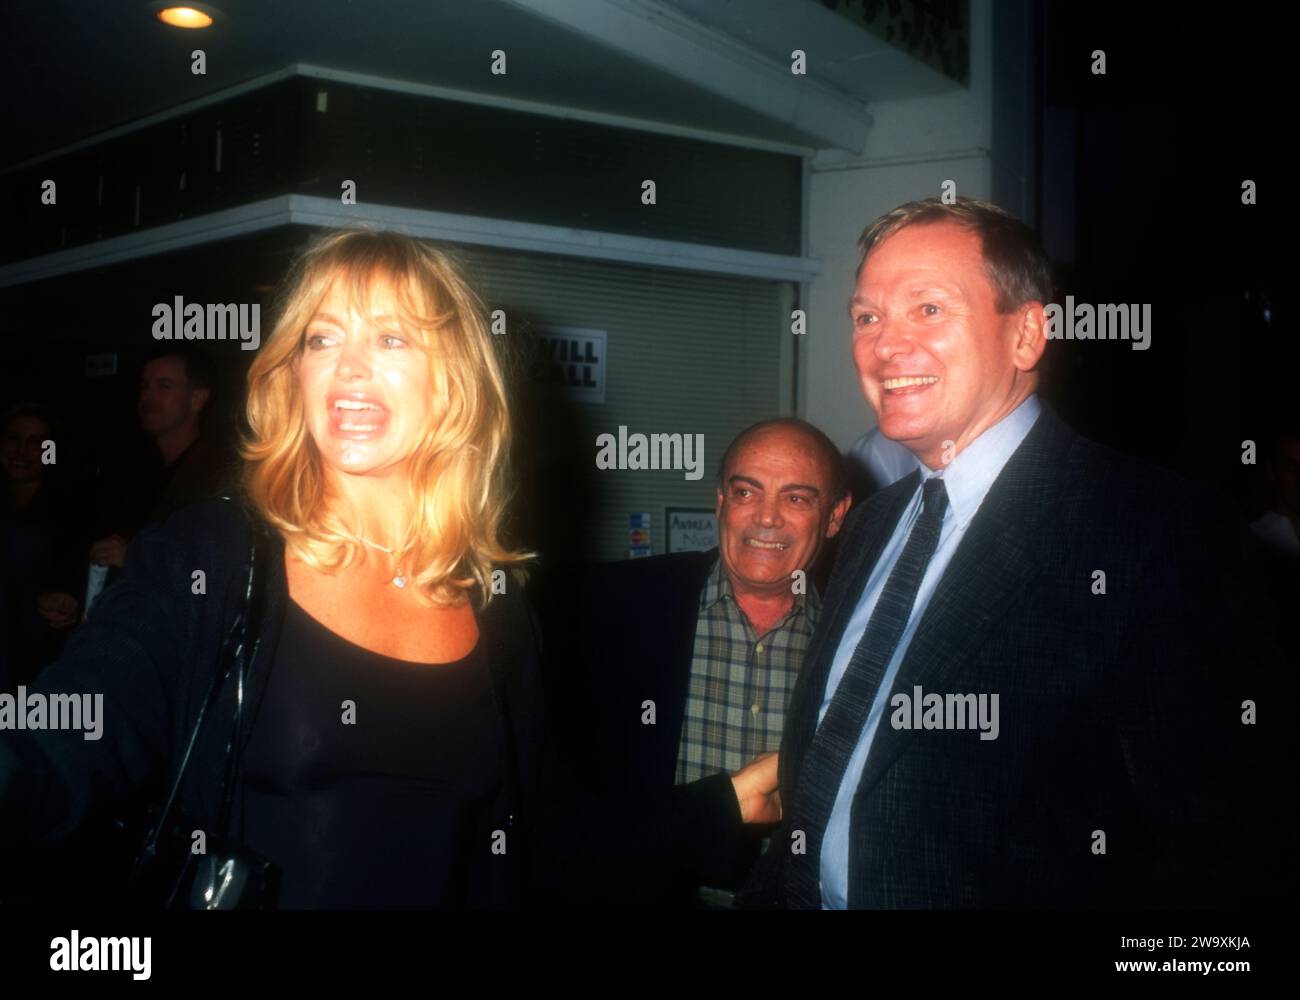 Los Angeles, California, USA 13th October 1996 (Exclusive) Actress Goldie Hawn and Costume Designer Bob Mackie on October 13, 1996 in Los Angeles, California, USA. Photo by Barry King/Alamy Stock Photo Stock Photo